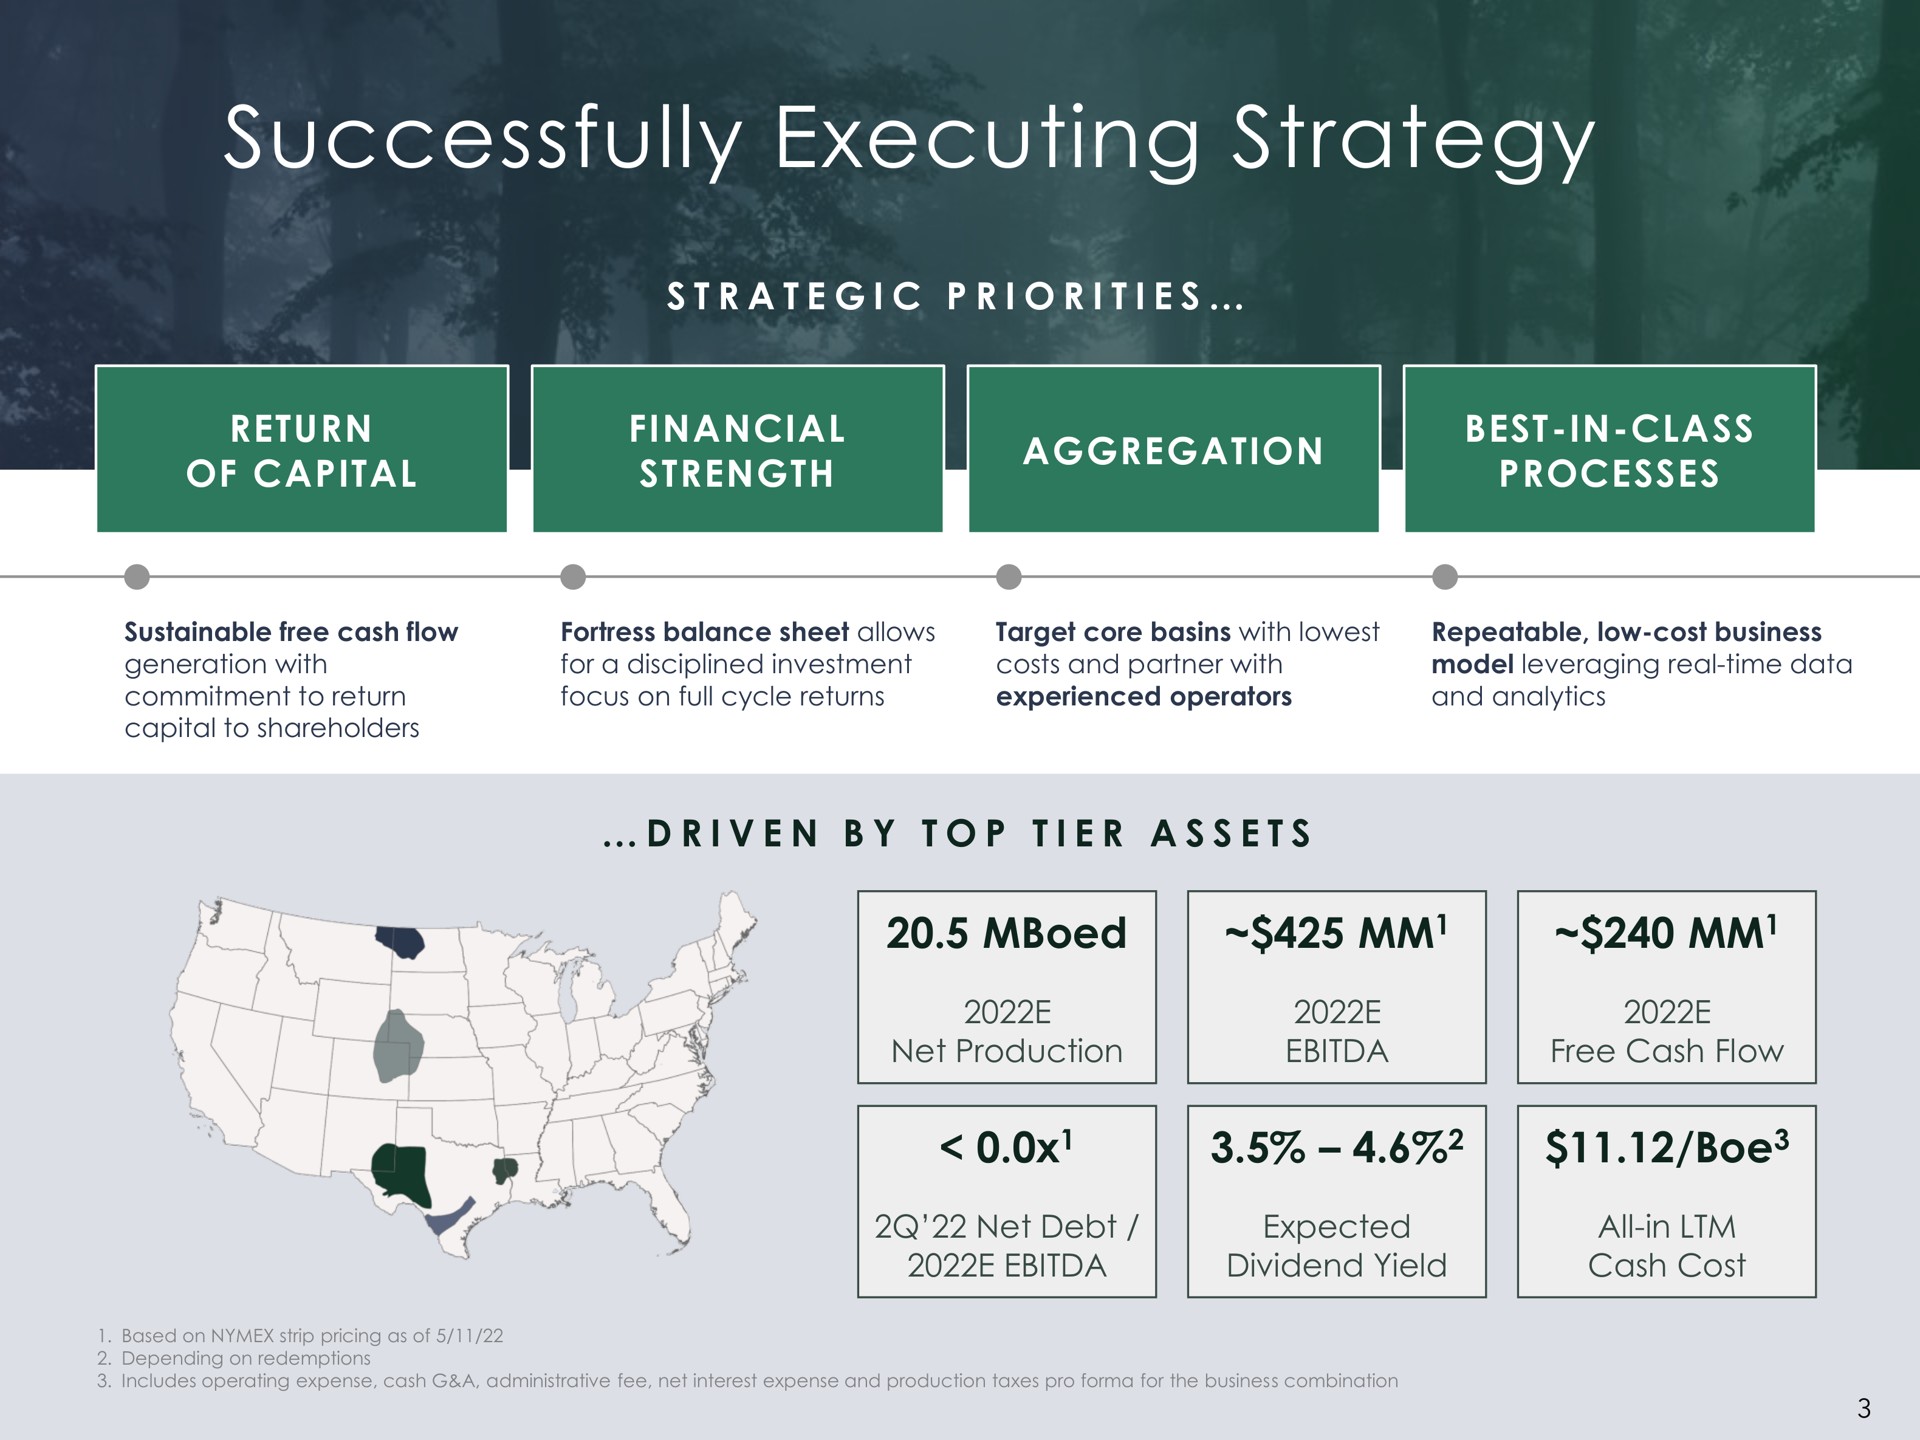 successfully executing strategy be net production net debt expected | Granite Ridge